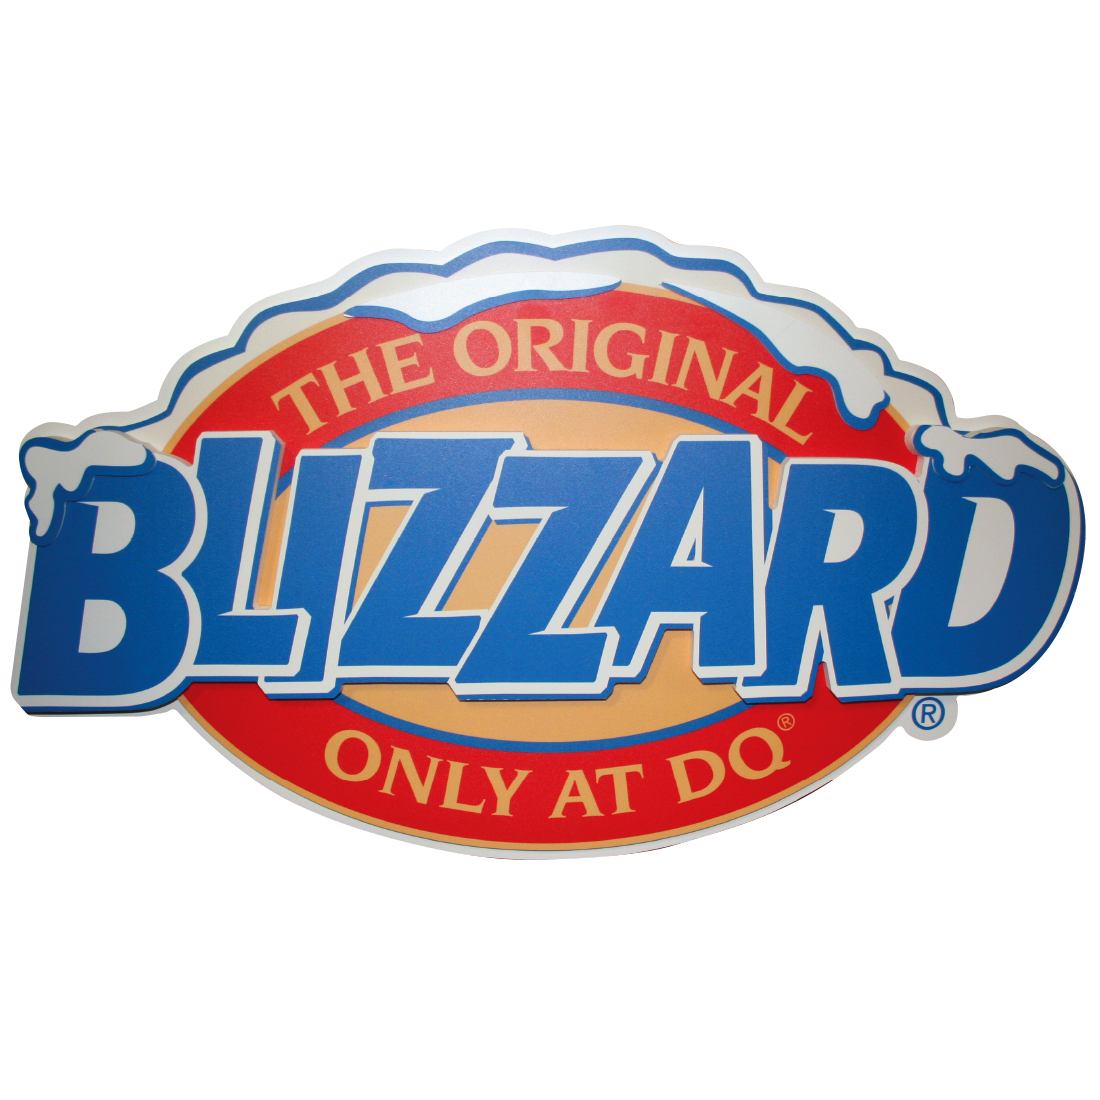 Blizzard Logo Large   Dimensional   In Store Signage